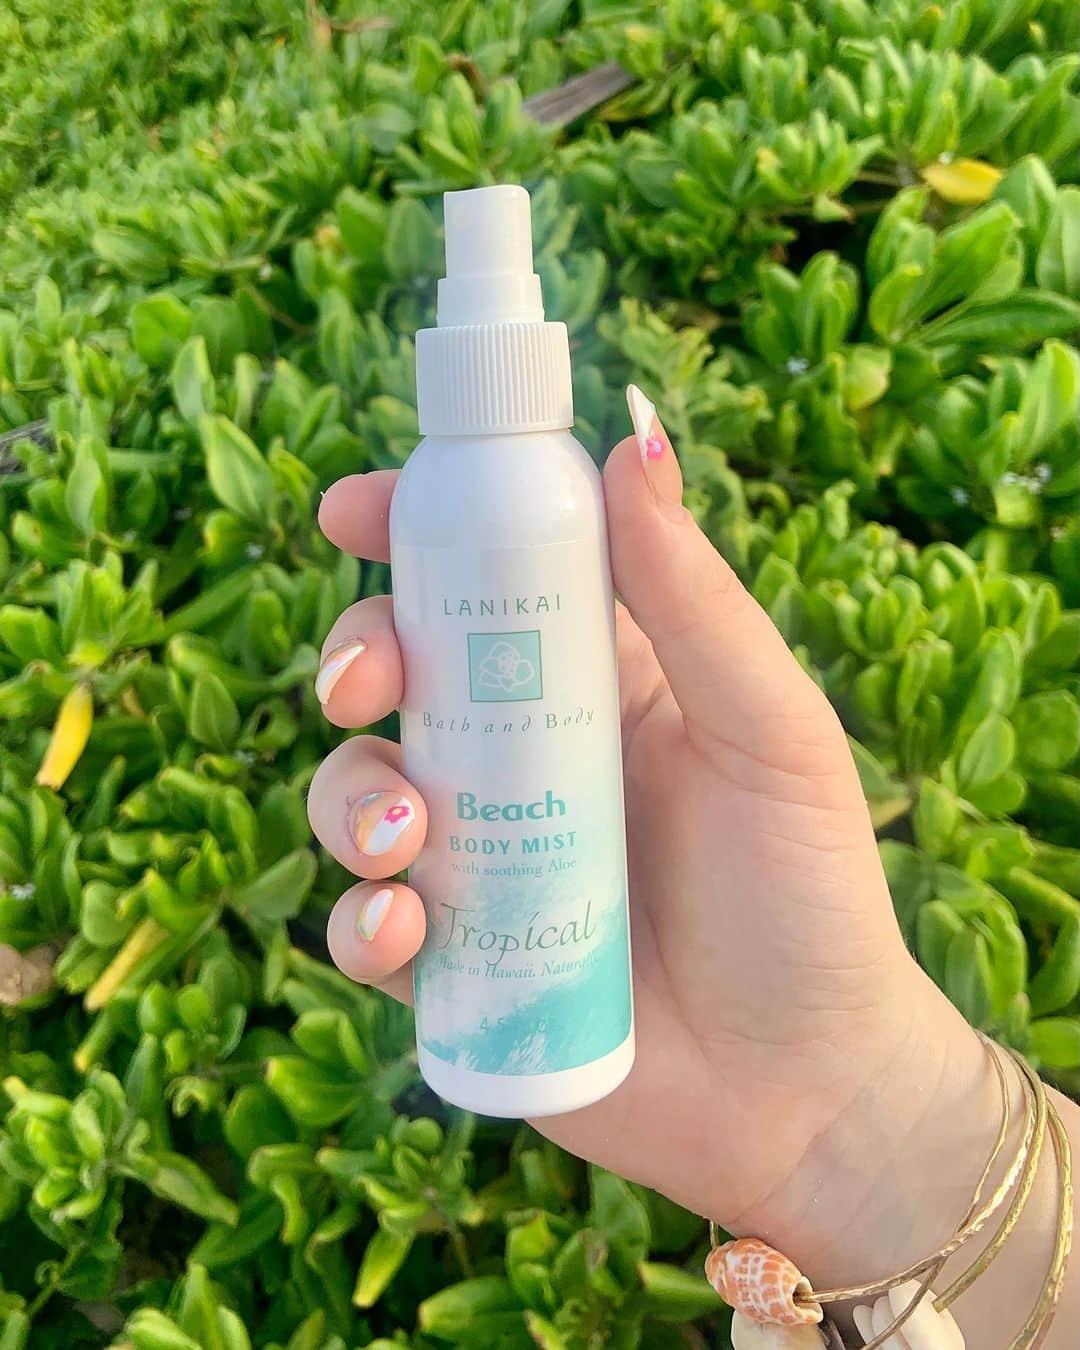 Lanikai Bath and Bodyのインスタグラム：「Our naturally nourishing Face & Body Mist is a local favorite. A tropical splash that soothes, hydrates, and refreshes like a Hawaiian waterfall!  A quick spritz locks in moisture, reviving dry and tired skin, without residue. Infused with purified Hawaiian Water, Aloe vera, and Vitamin E, it’s the perfect rejuvenation for your skin.  ✅ Tones, hydrates & refreshes ✅ 100% evaporation, no residue ✅ Free of harsh chemicals  Keep it with you for a fresh, hydrating escape throughout the day. #LanikaiRefresh #NaturalBeauty  #lanikaibathandbody #MidSummerSale #kailuatownhi 🌴💦」